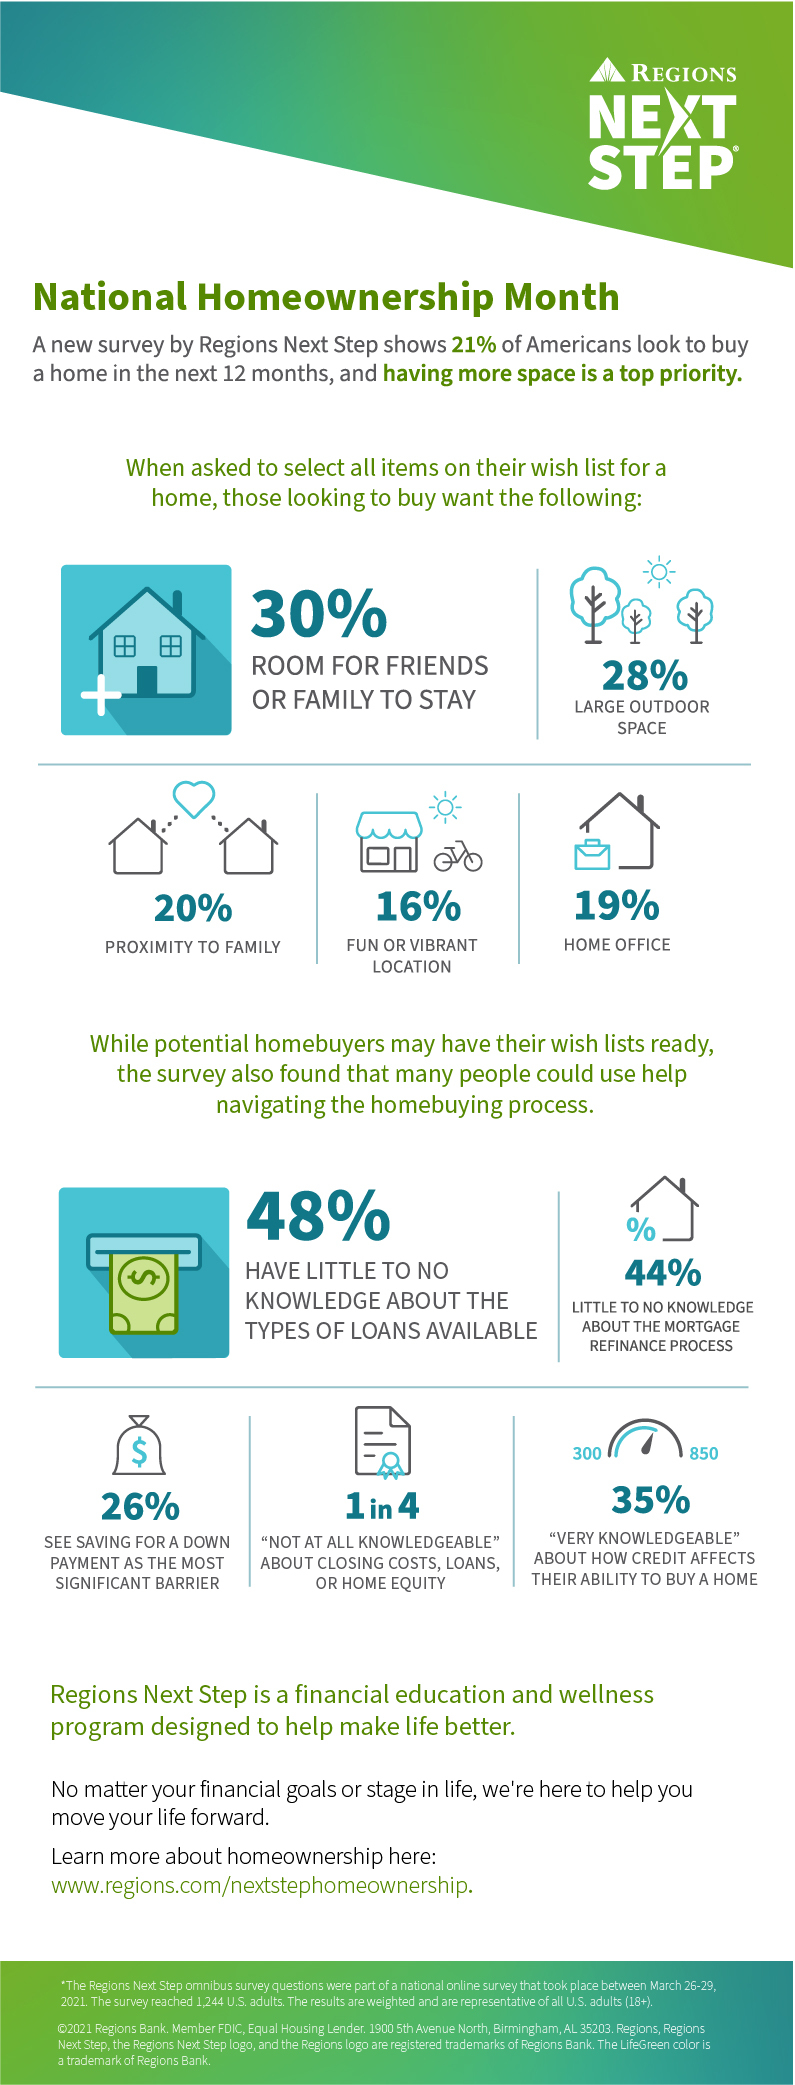 national homeownership month infographic